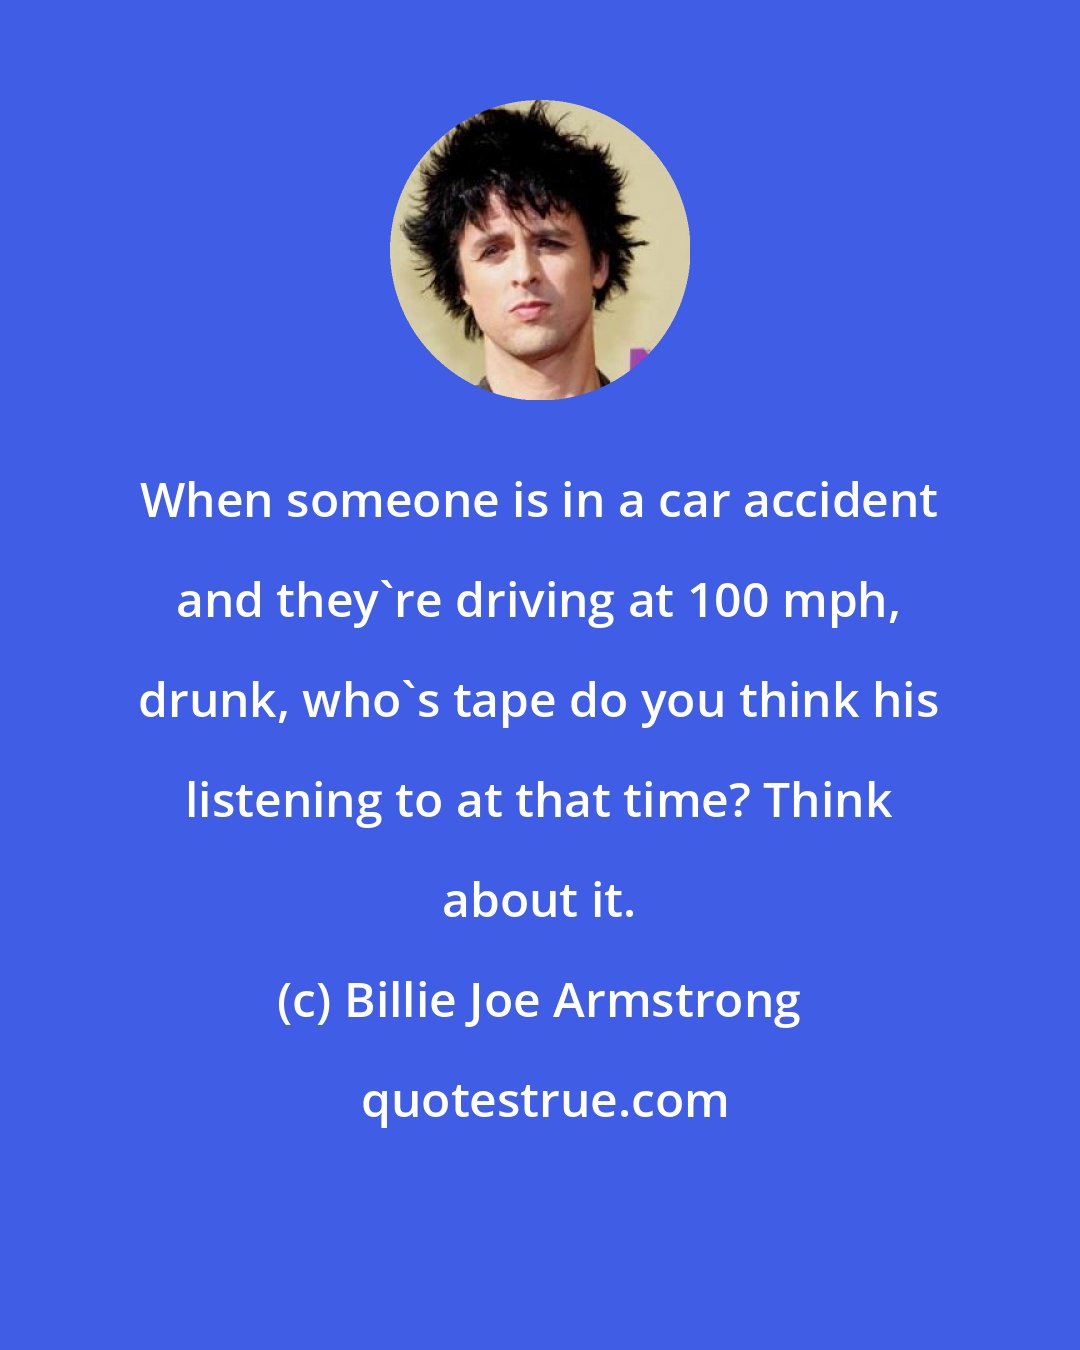 Billie Joe Armstrong: When someone is in a car accident and they're driving at 100 mph, drunk, who's tape do you think his listening to at that time? Think about it.